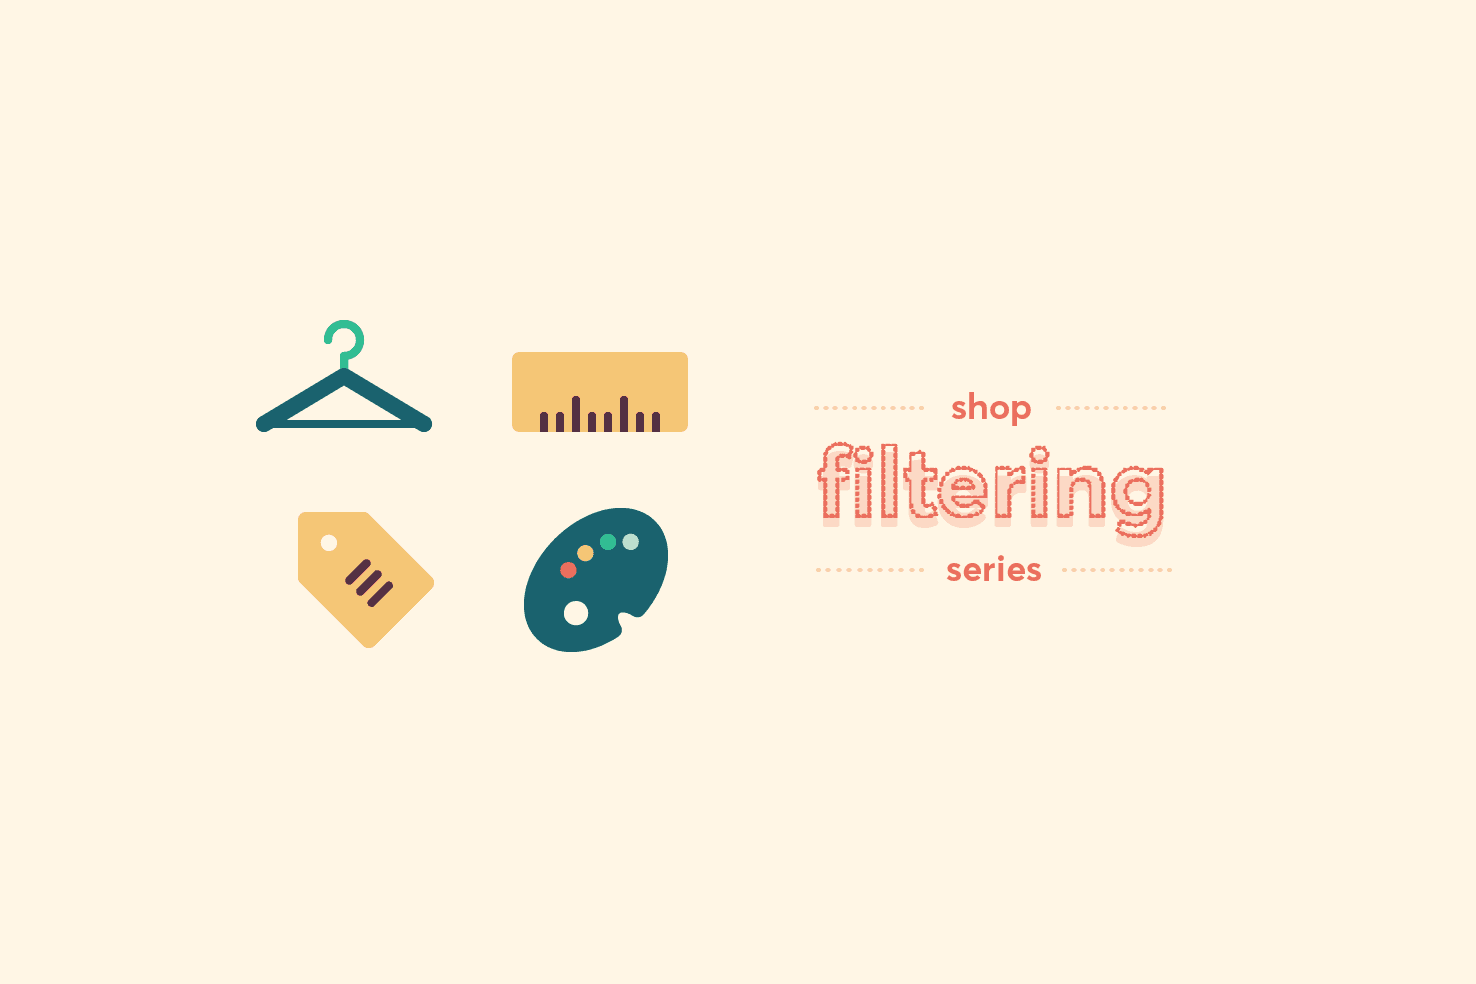 Shop filter series: sketching & starting wireframes (featured image)